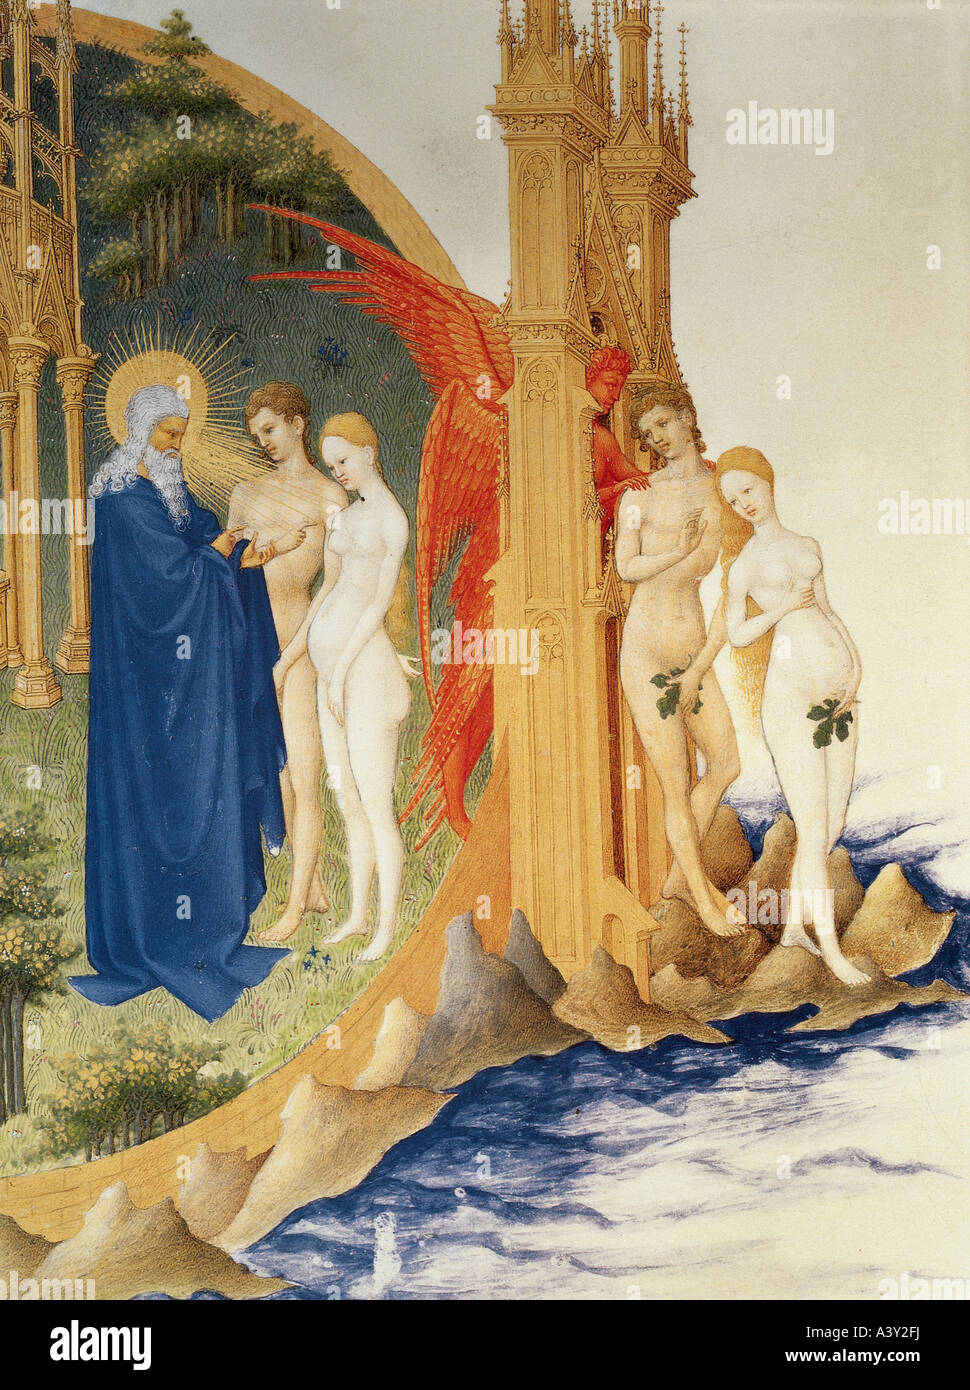 "fine arts, religious art, Adam and Eve, "expulsion from paradise", miniature, detail, by Jean Limburg, from book of hours of Stock Photo